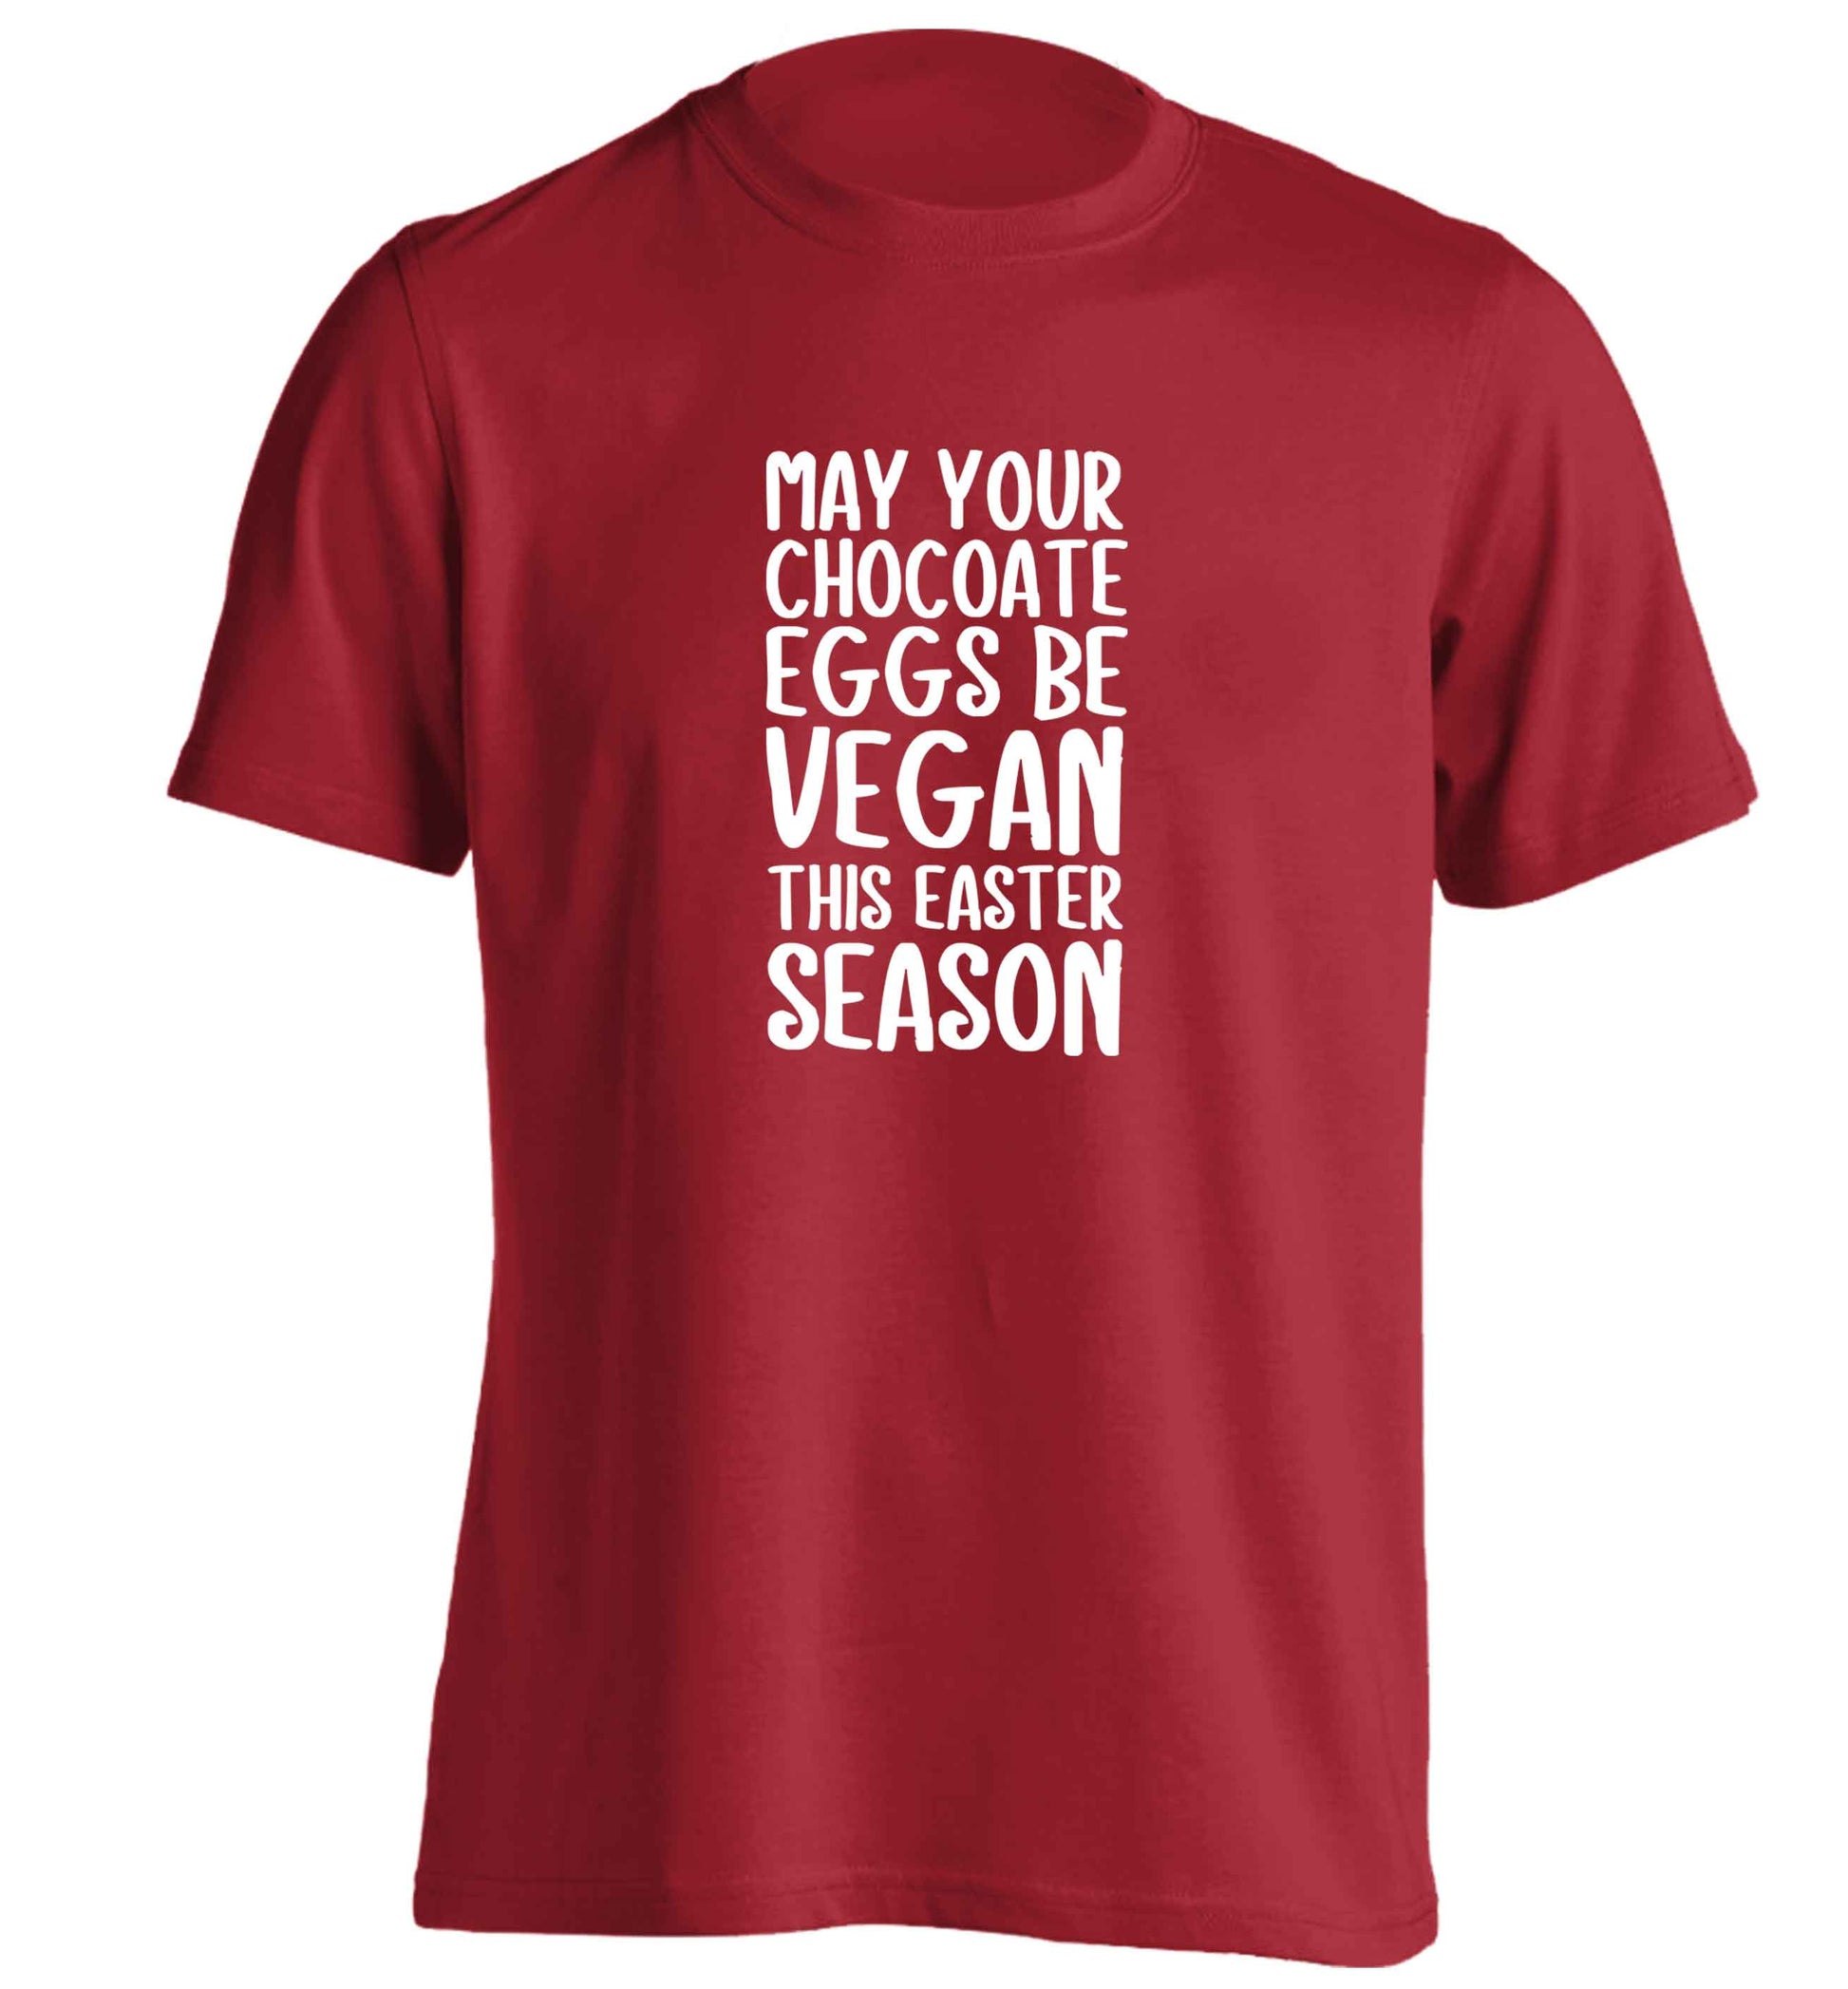 Easter bunny approved! Vegans will love this easter themed adults unisex red Tshirt 2XL